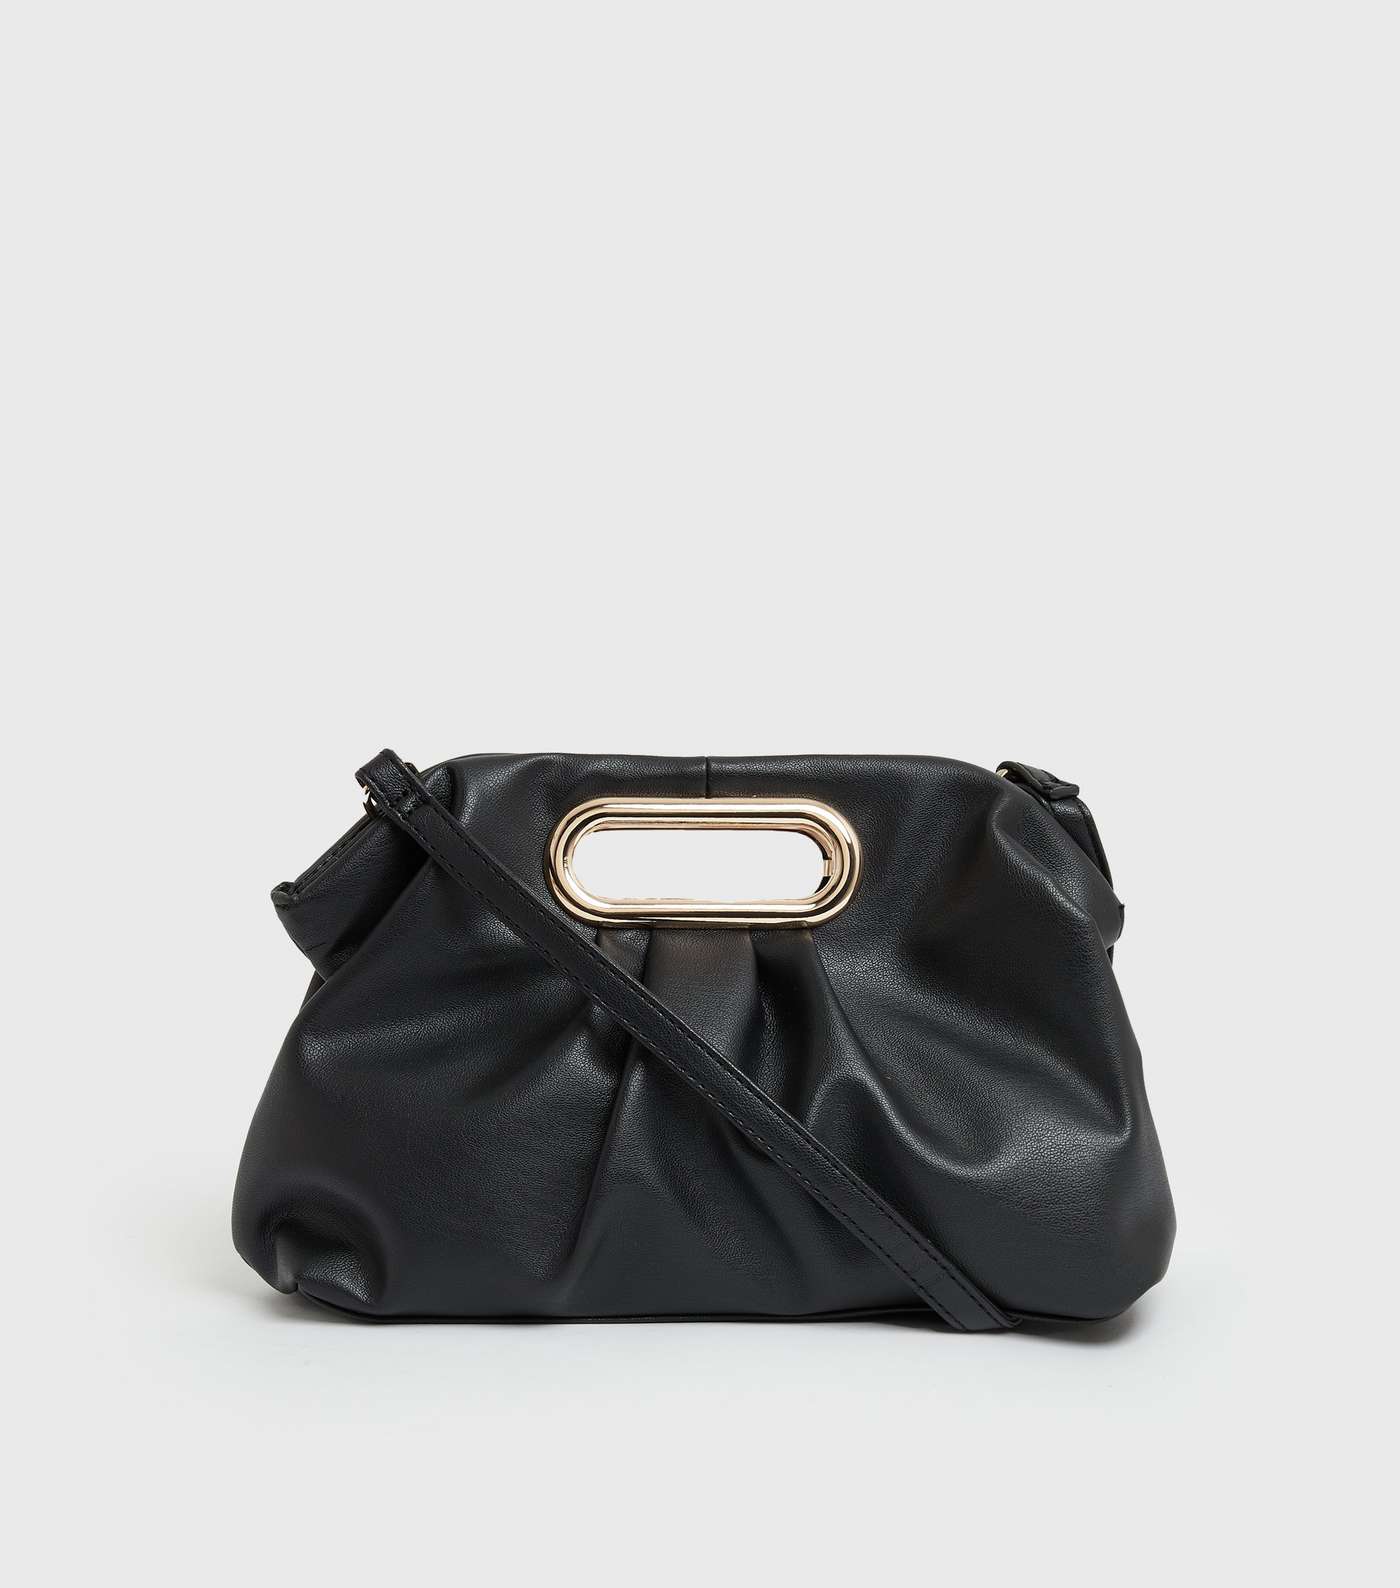 Black Leather-Look Ruched Clutch Bag